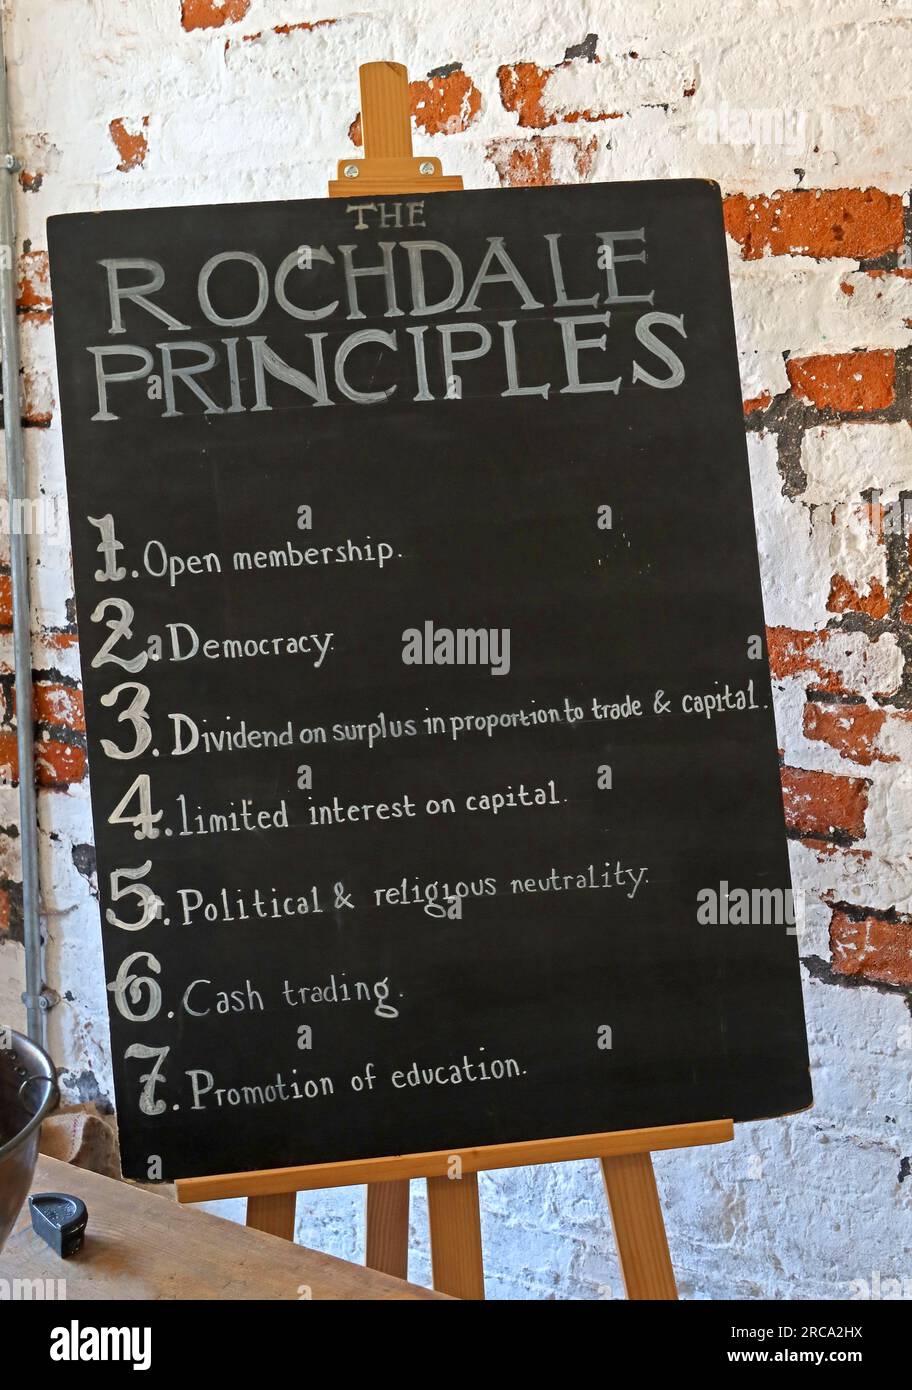 The Rochdale Co-Op 7 Principles, from the Rochdale Pioneers, Toad Lane, Lancs, England, UK, OL12 0NU Stock Photo